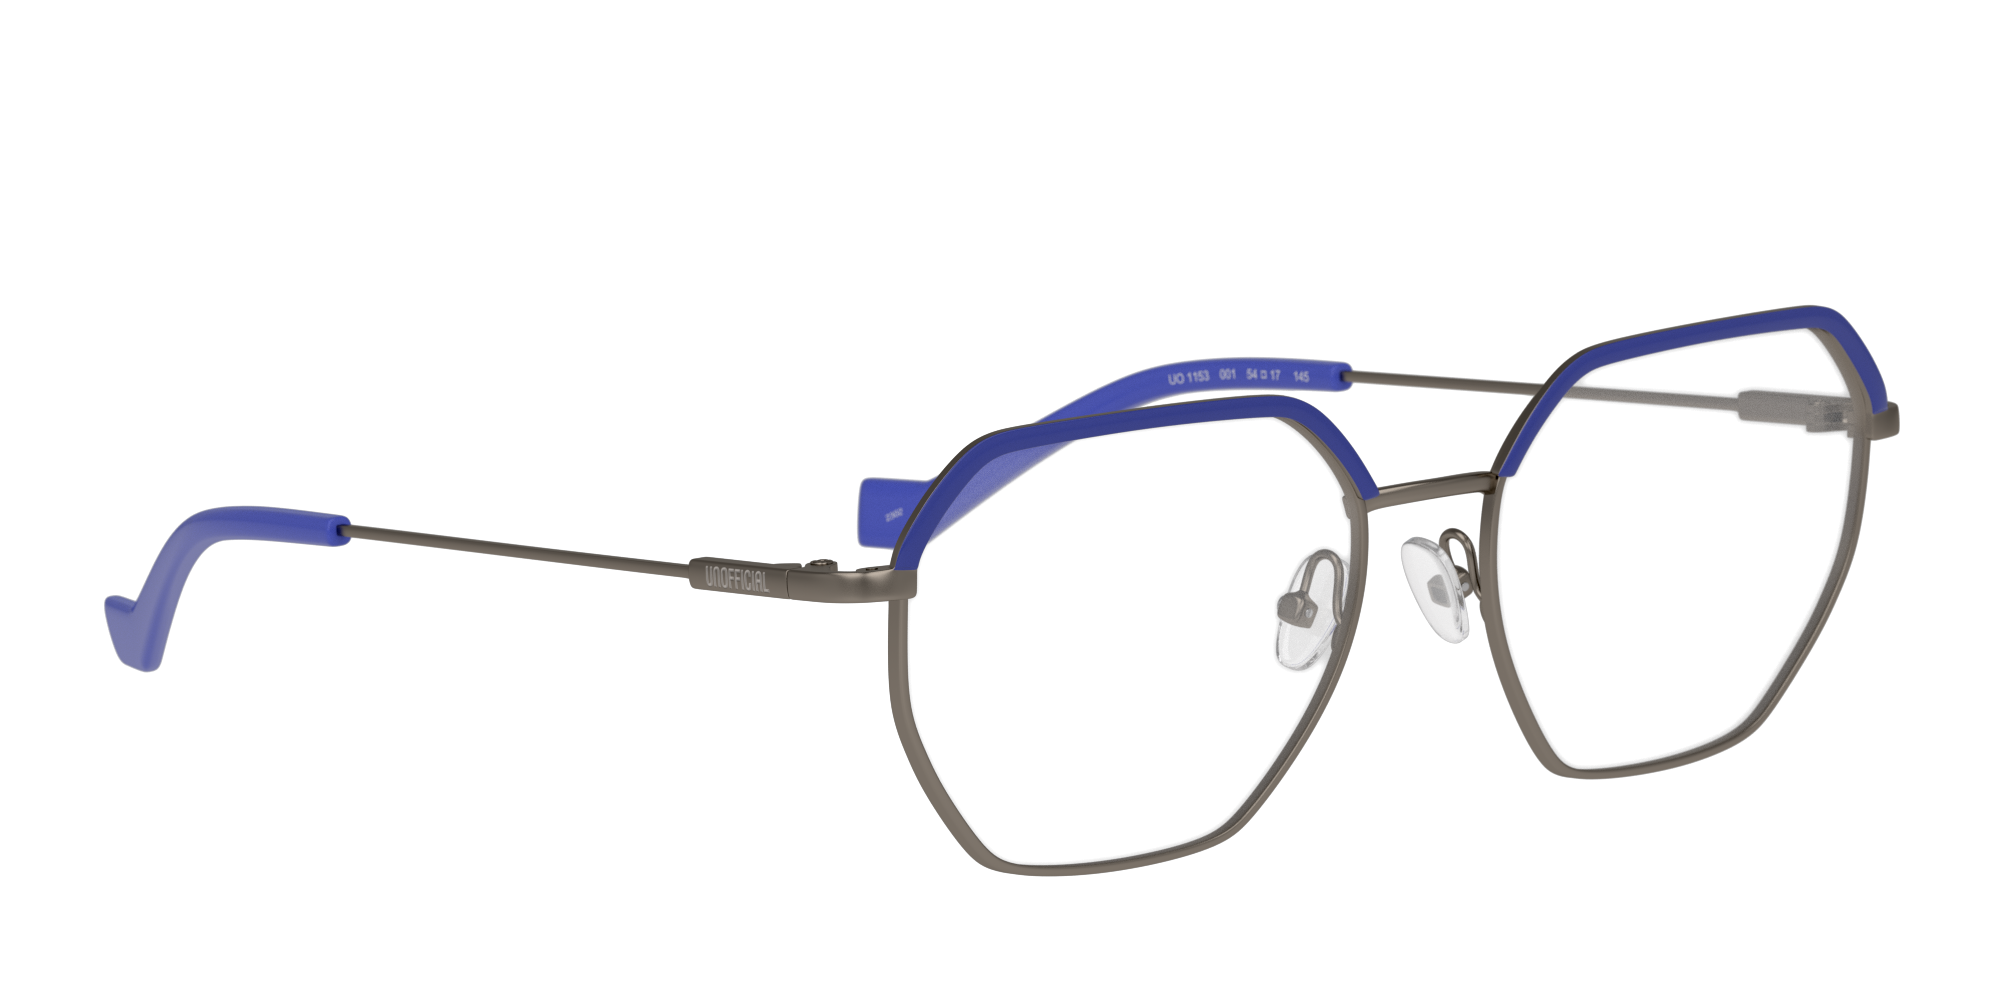 Angle_Right01 Unofficial UO1153 Glasses Transparent / Grey